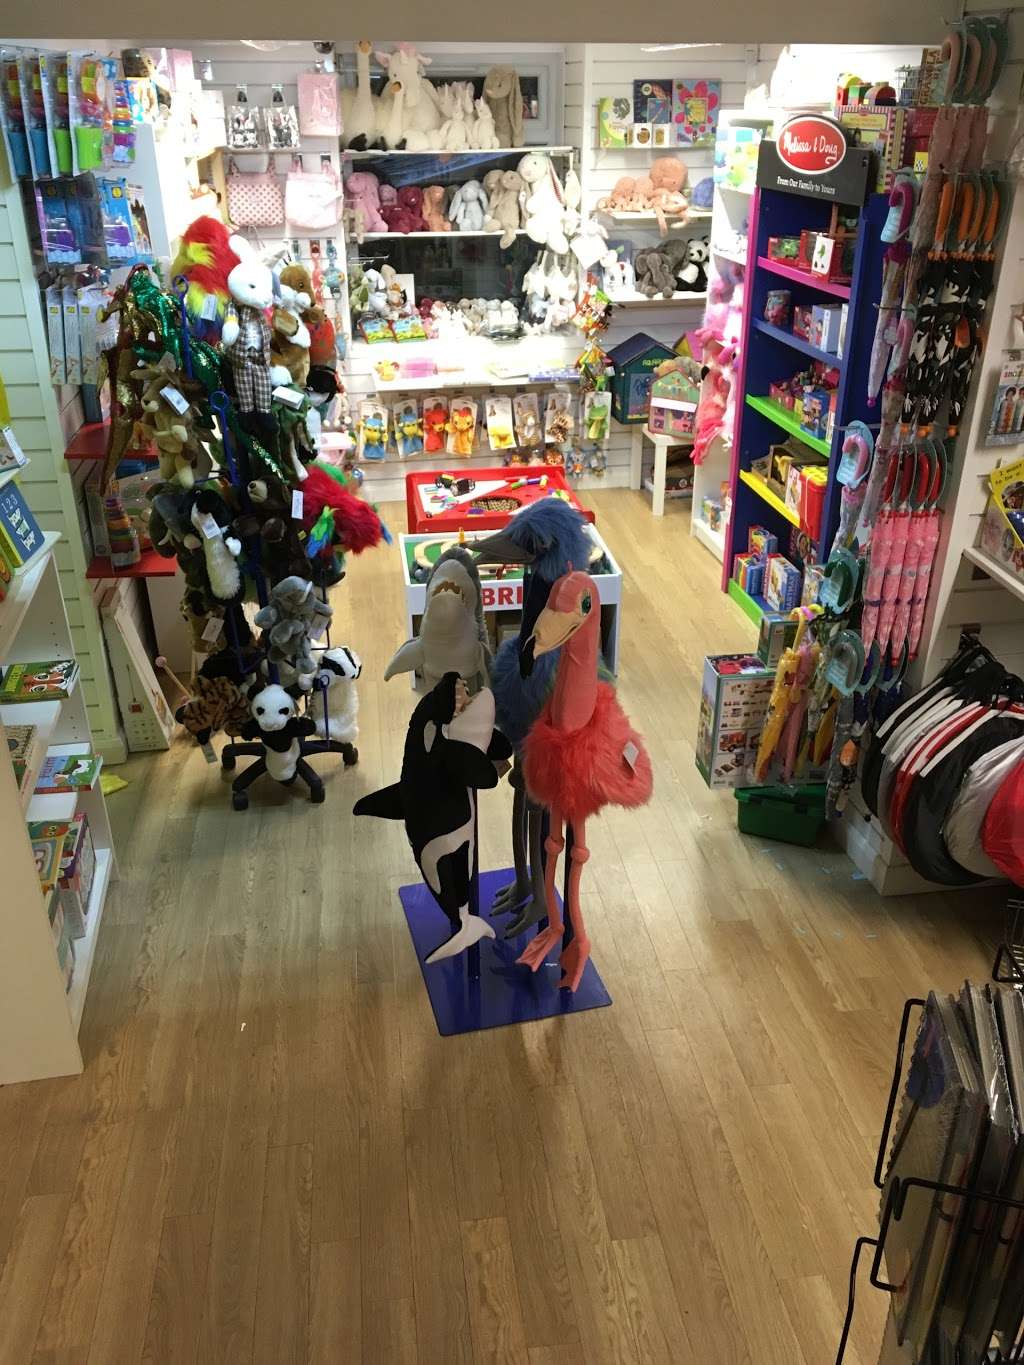 Cachao Toys | 142 Regents Park Rd, Camden Town, London NW1 8XL, UK | Phone: 020 7449 9057